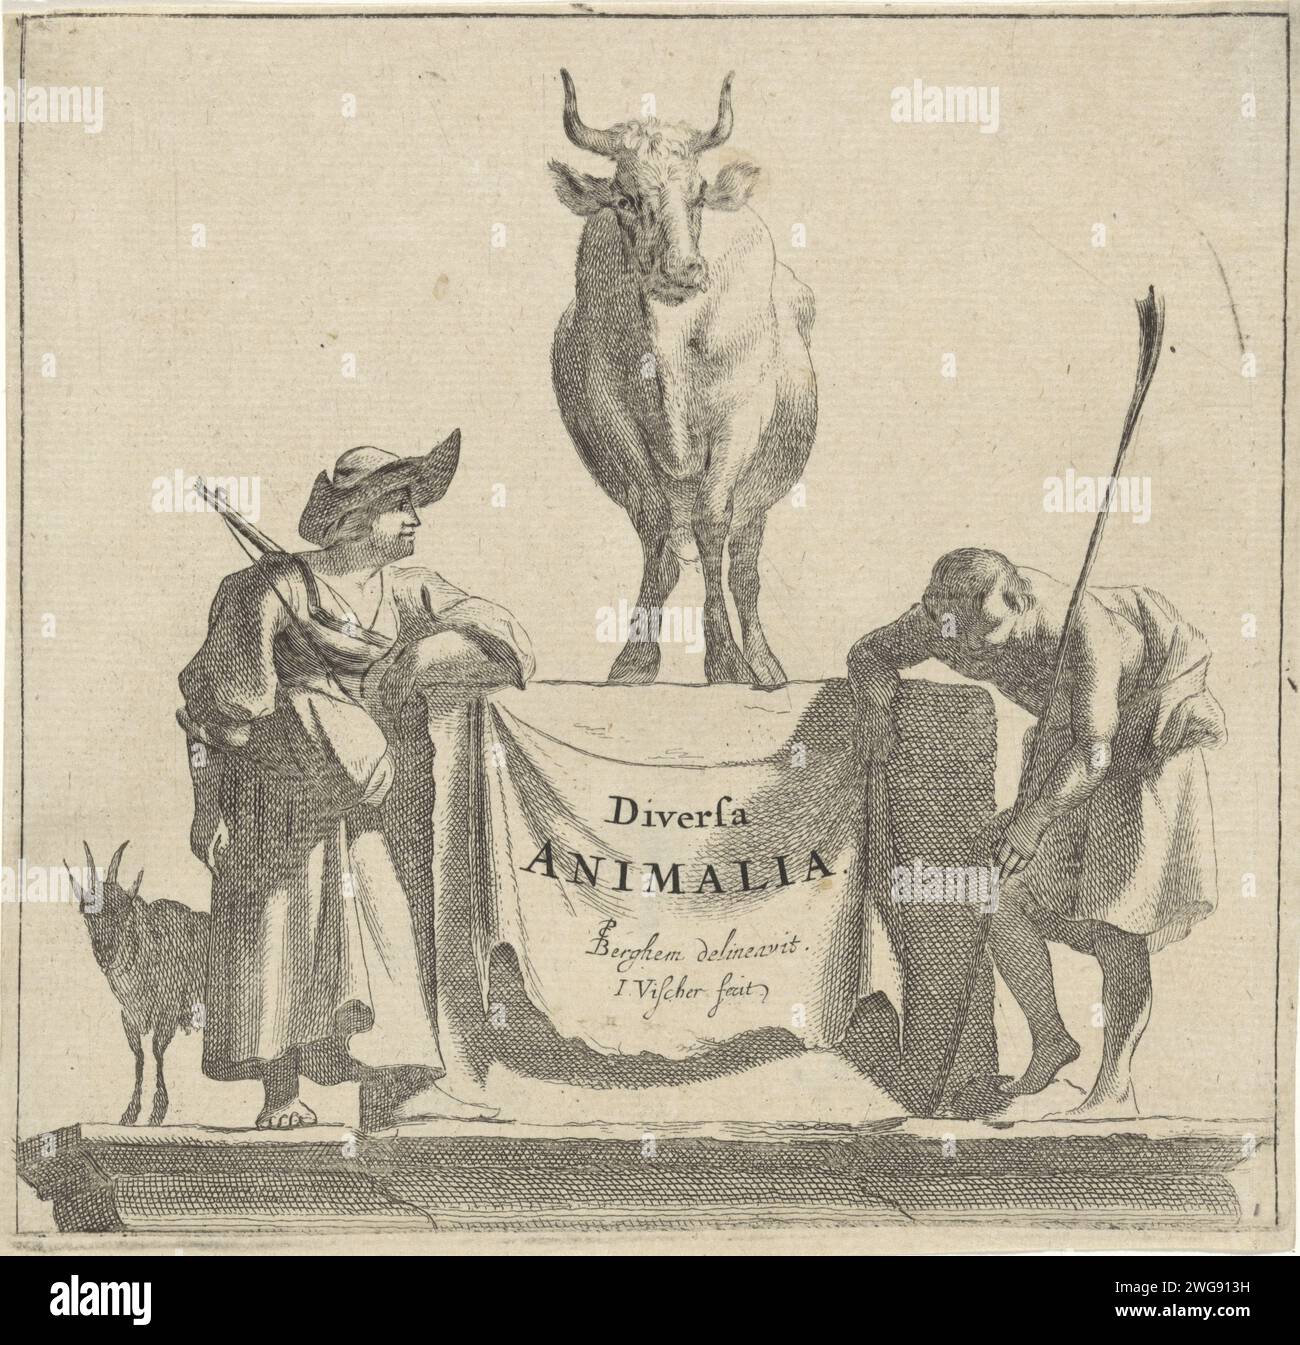 Title print for 'Diversa Animalia', Jan De Visscher, After Nicolaes Pietersz Berchem, 1643 - 1706 print Title print for the 12-part series 'Diversa Animalia' with prints of different animals in landscapes. The title is flanked by a shepherdin and a shepherd. The title has a cow. Northern Netherlands paper etching herding, herdsman, herdswoman, shepherd, shepherdess, cowherd, etc.. cow Stock Photo